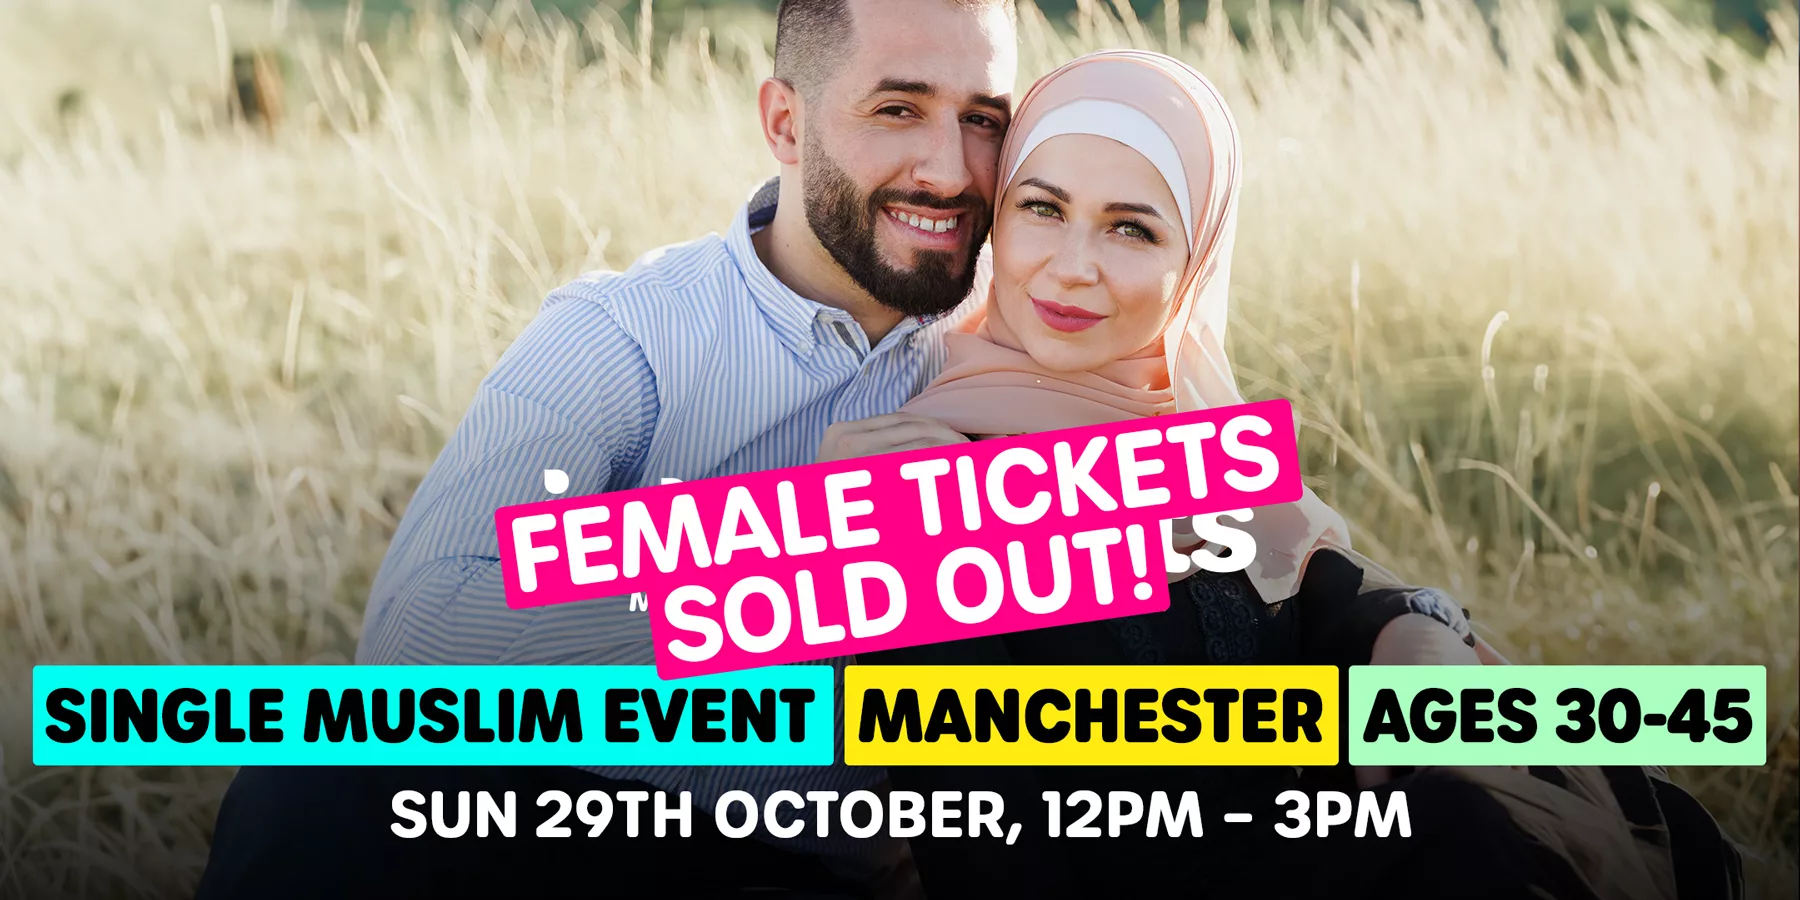 Muslim Marriage Event Manchester